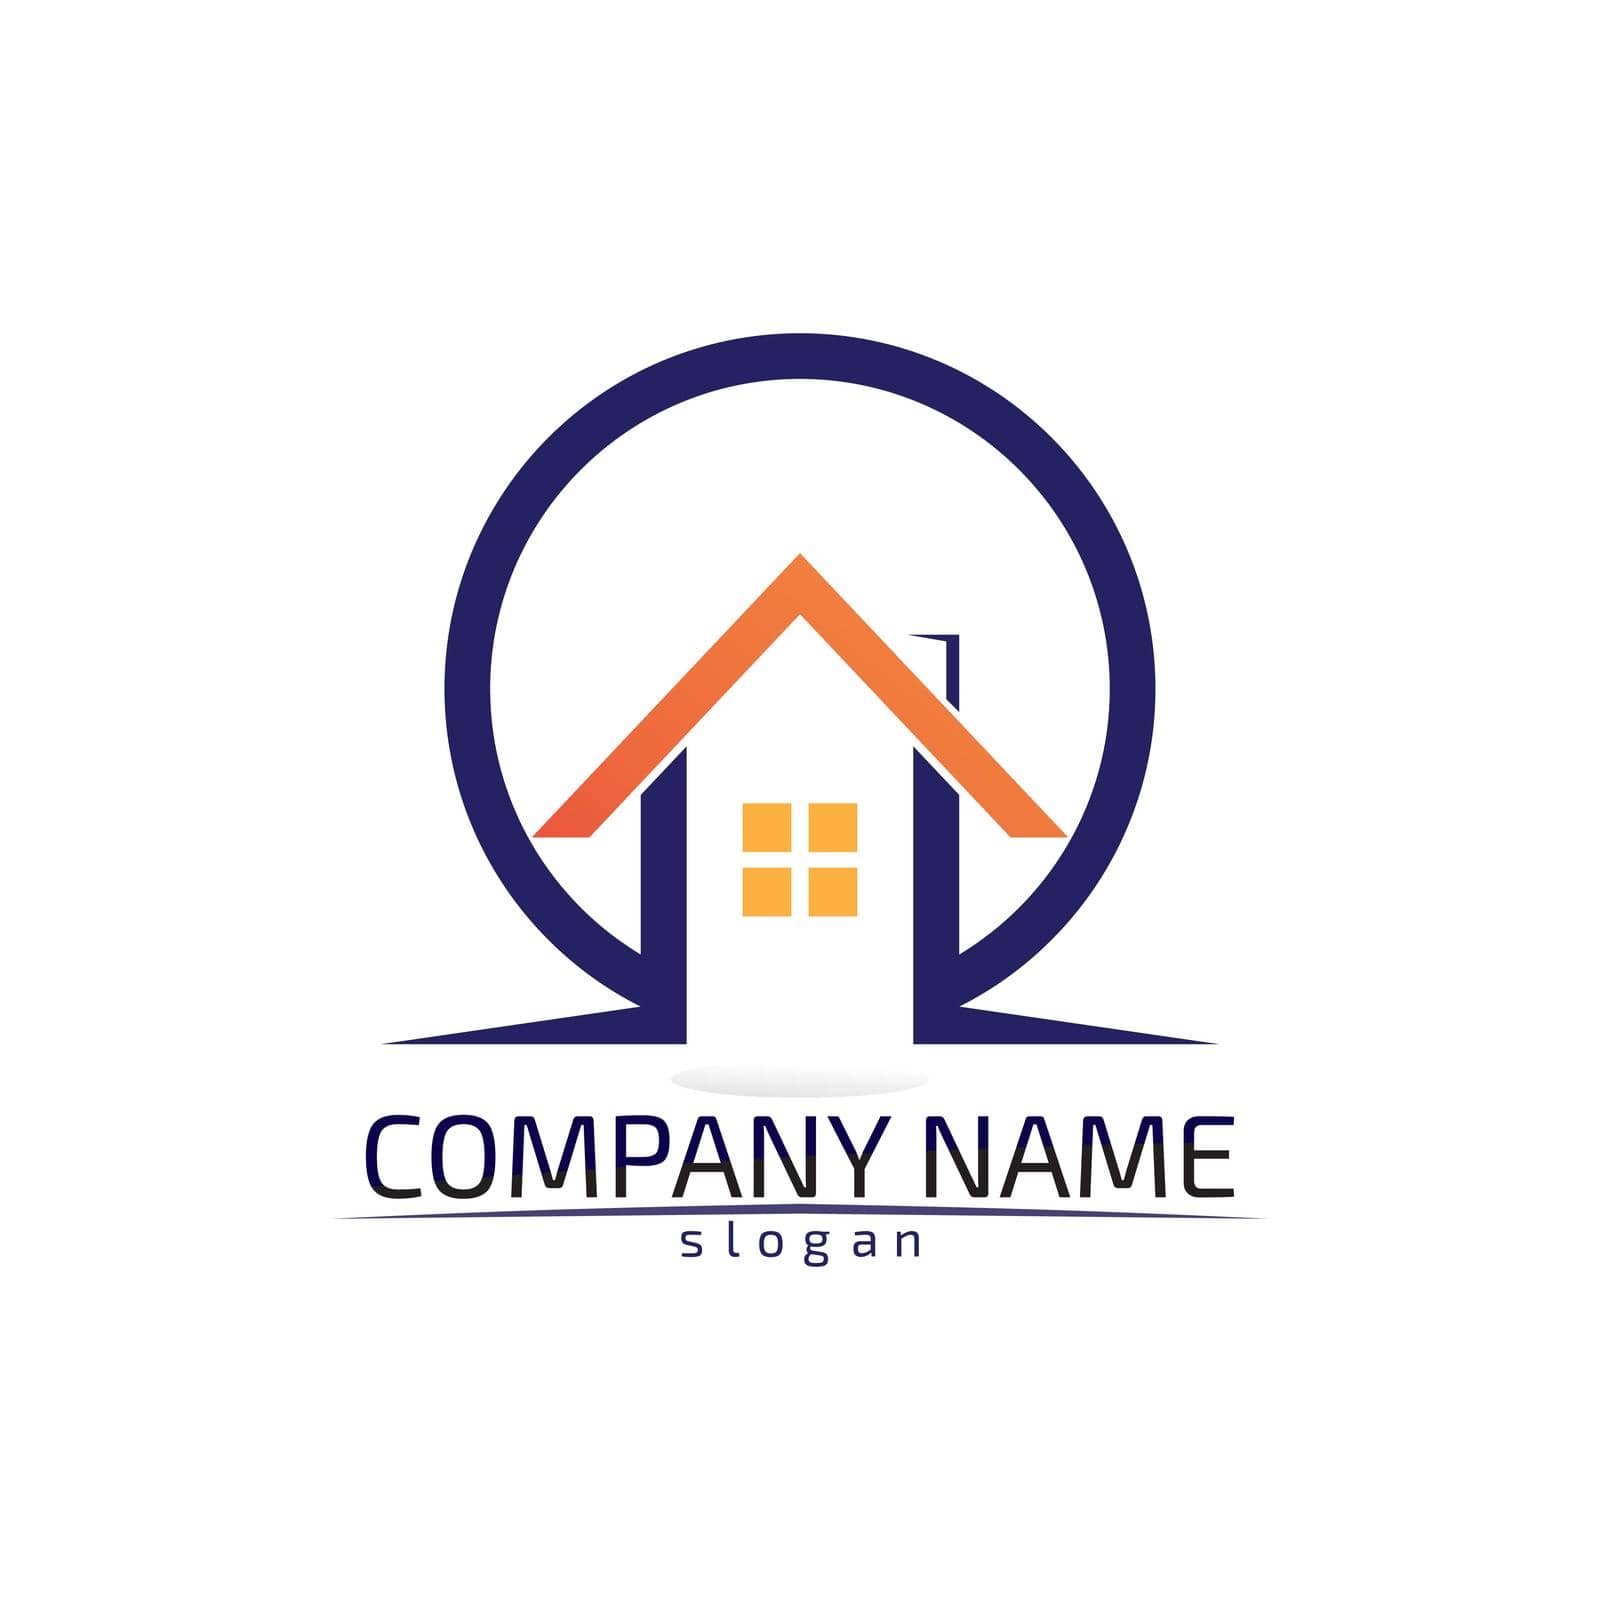 Real estate and home buildings logo icons template vector by Anggasaputro